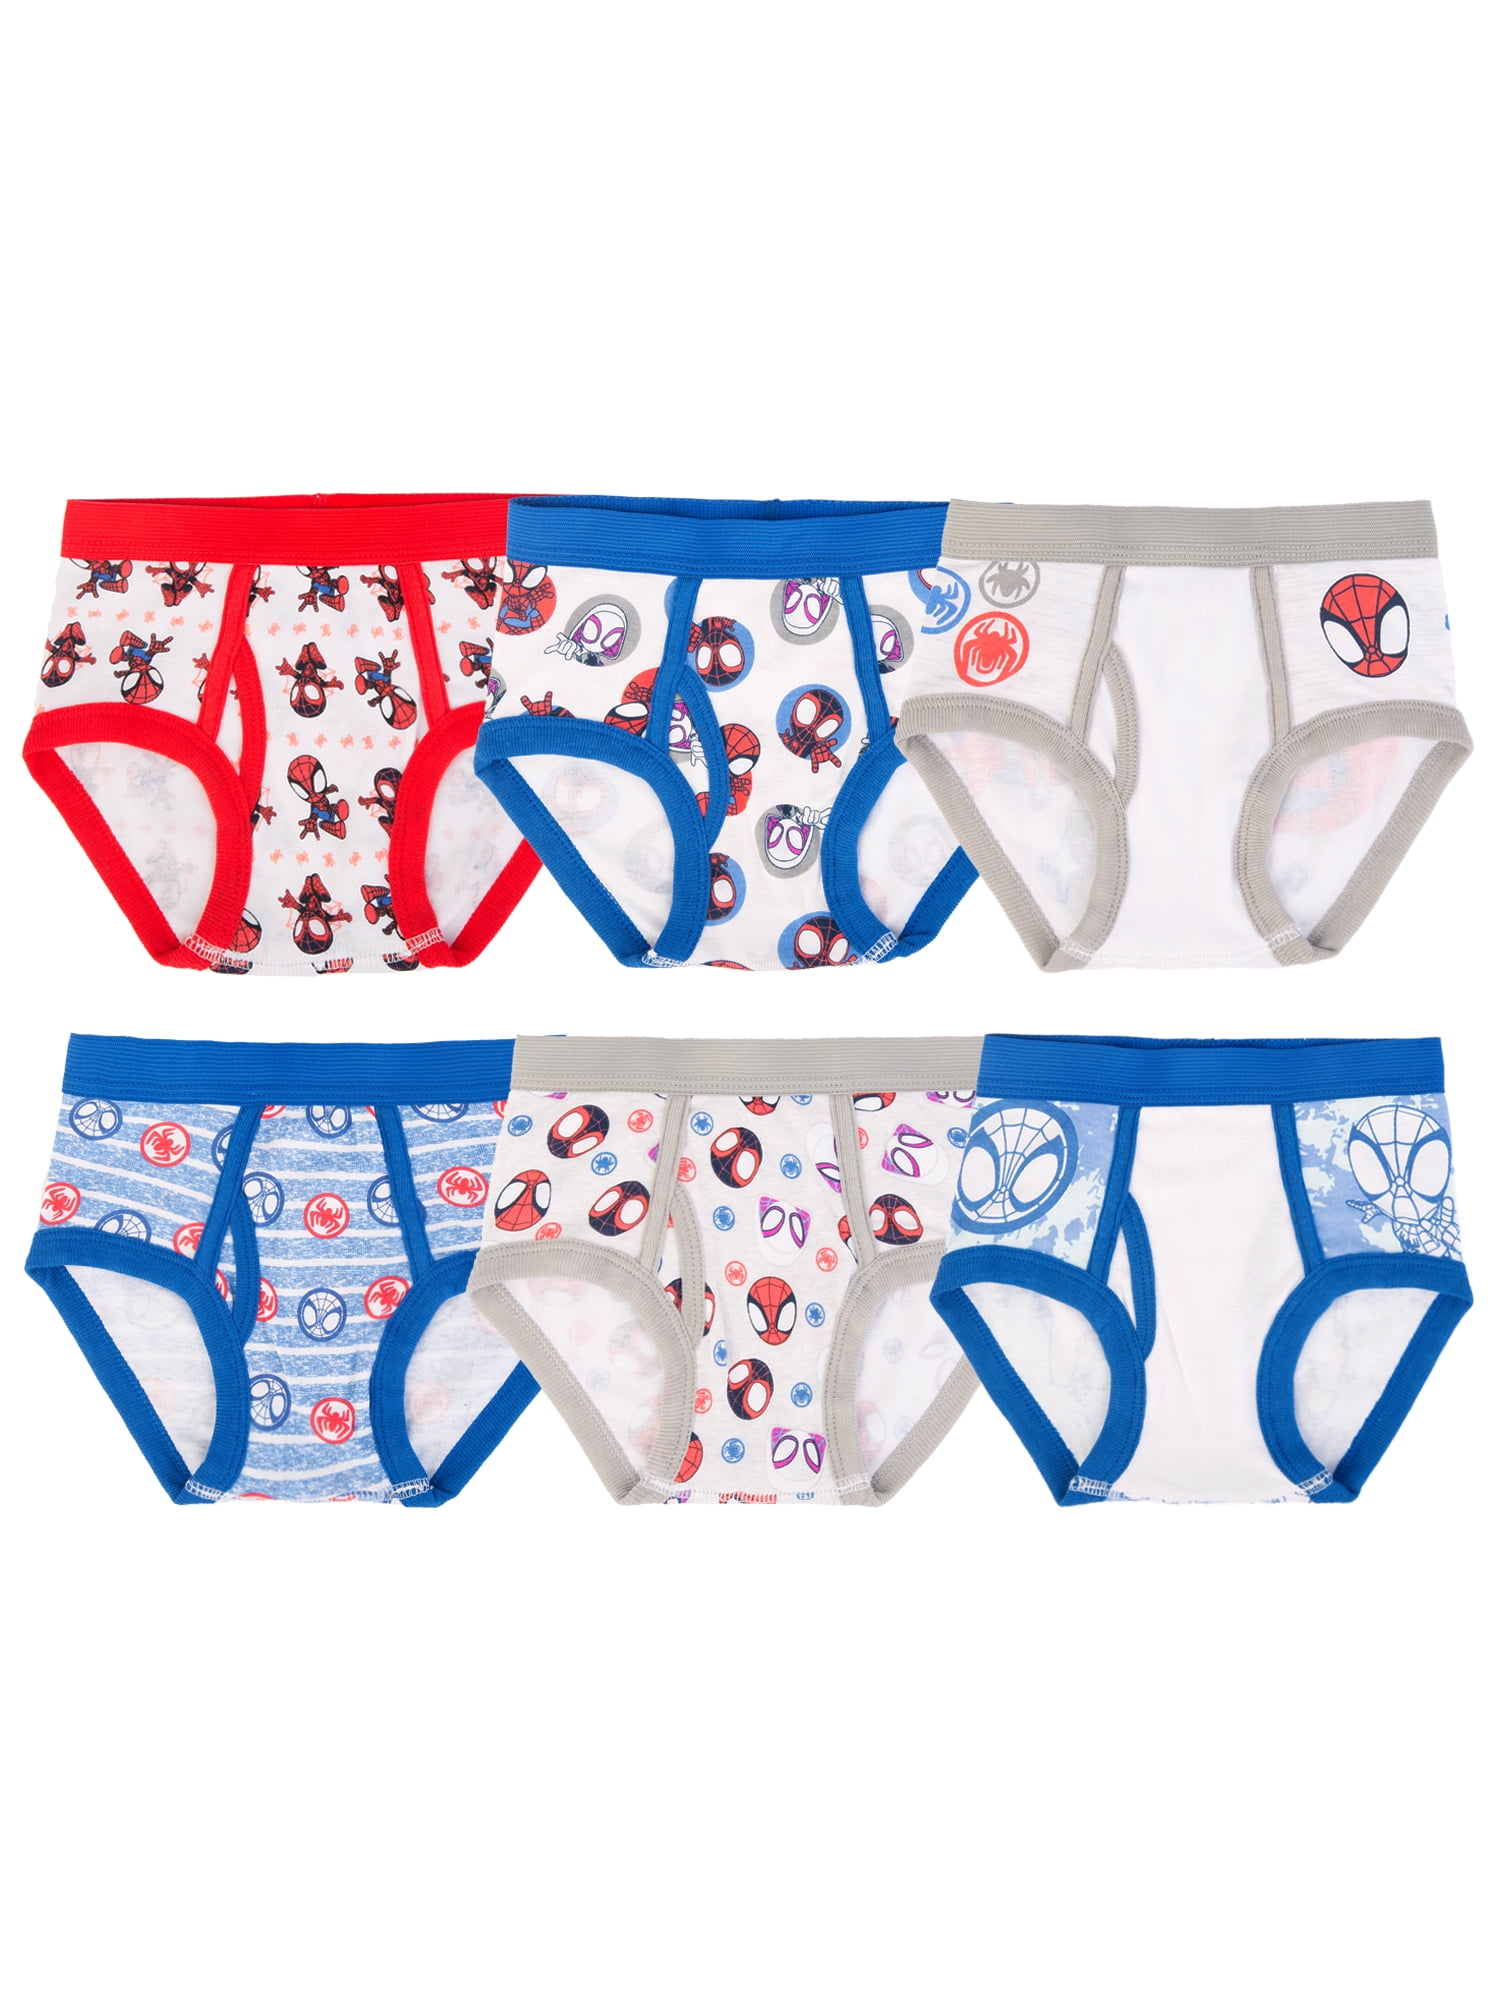 Spidey and His Amazing Friends Toddler Boys Briefs, 6 Pack Sizes 2T-4T 